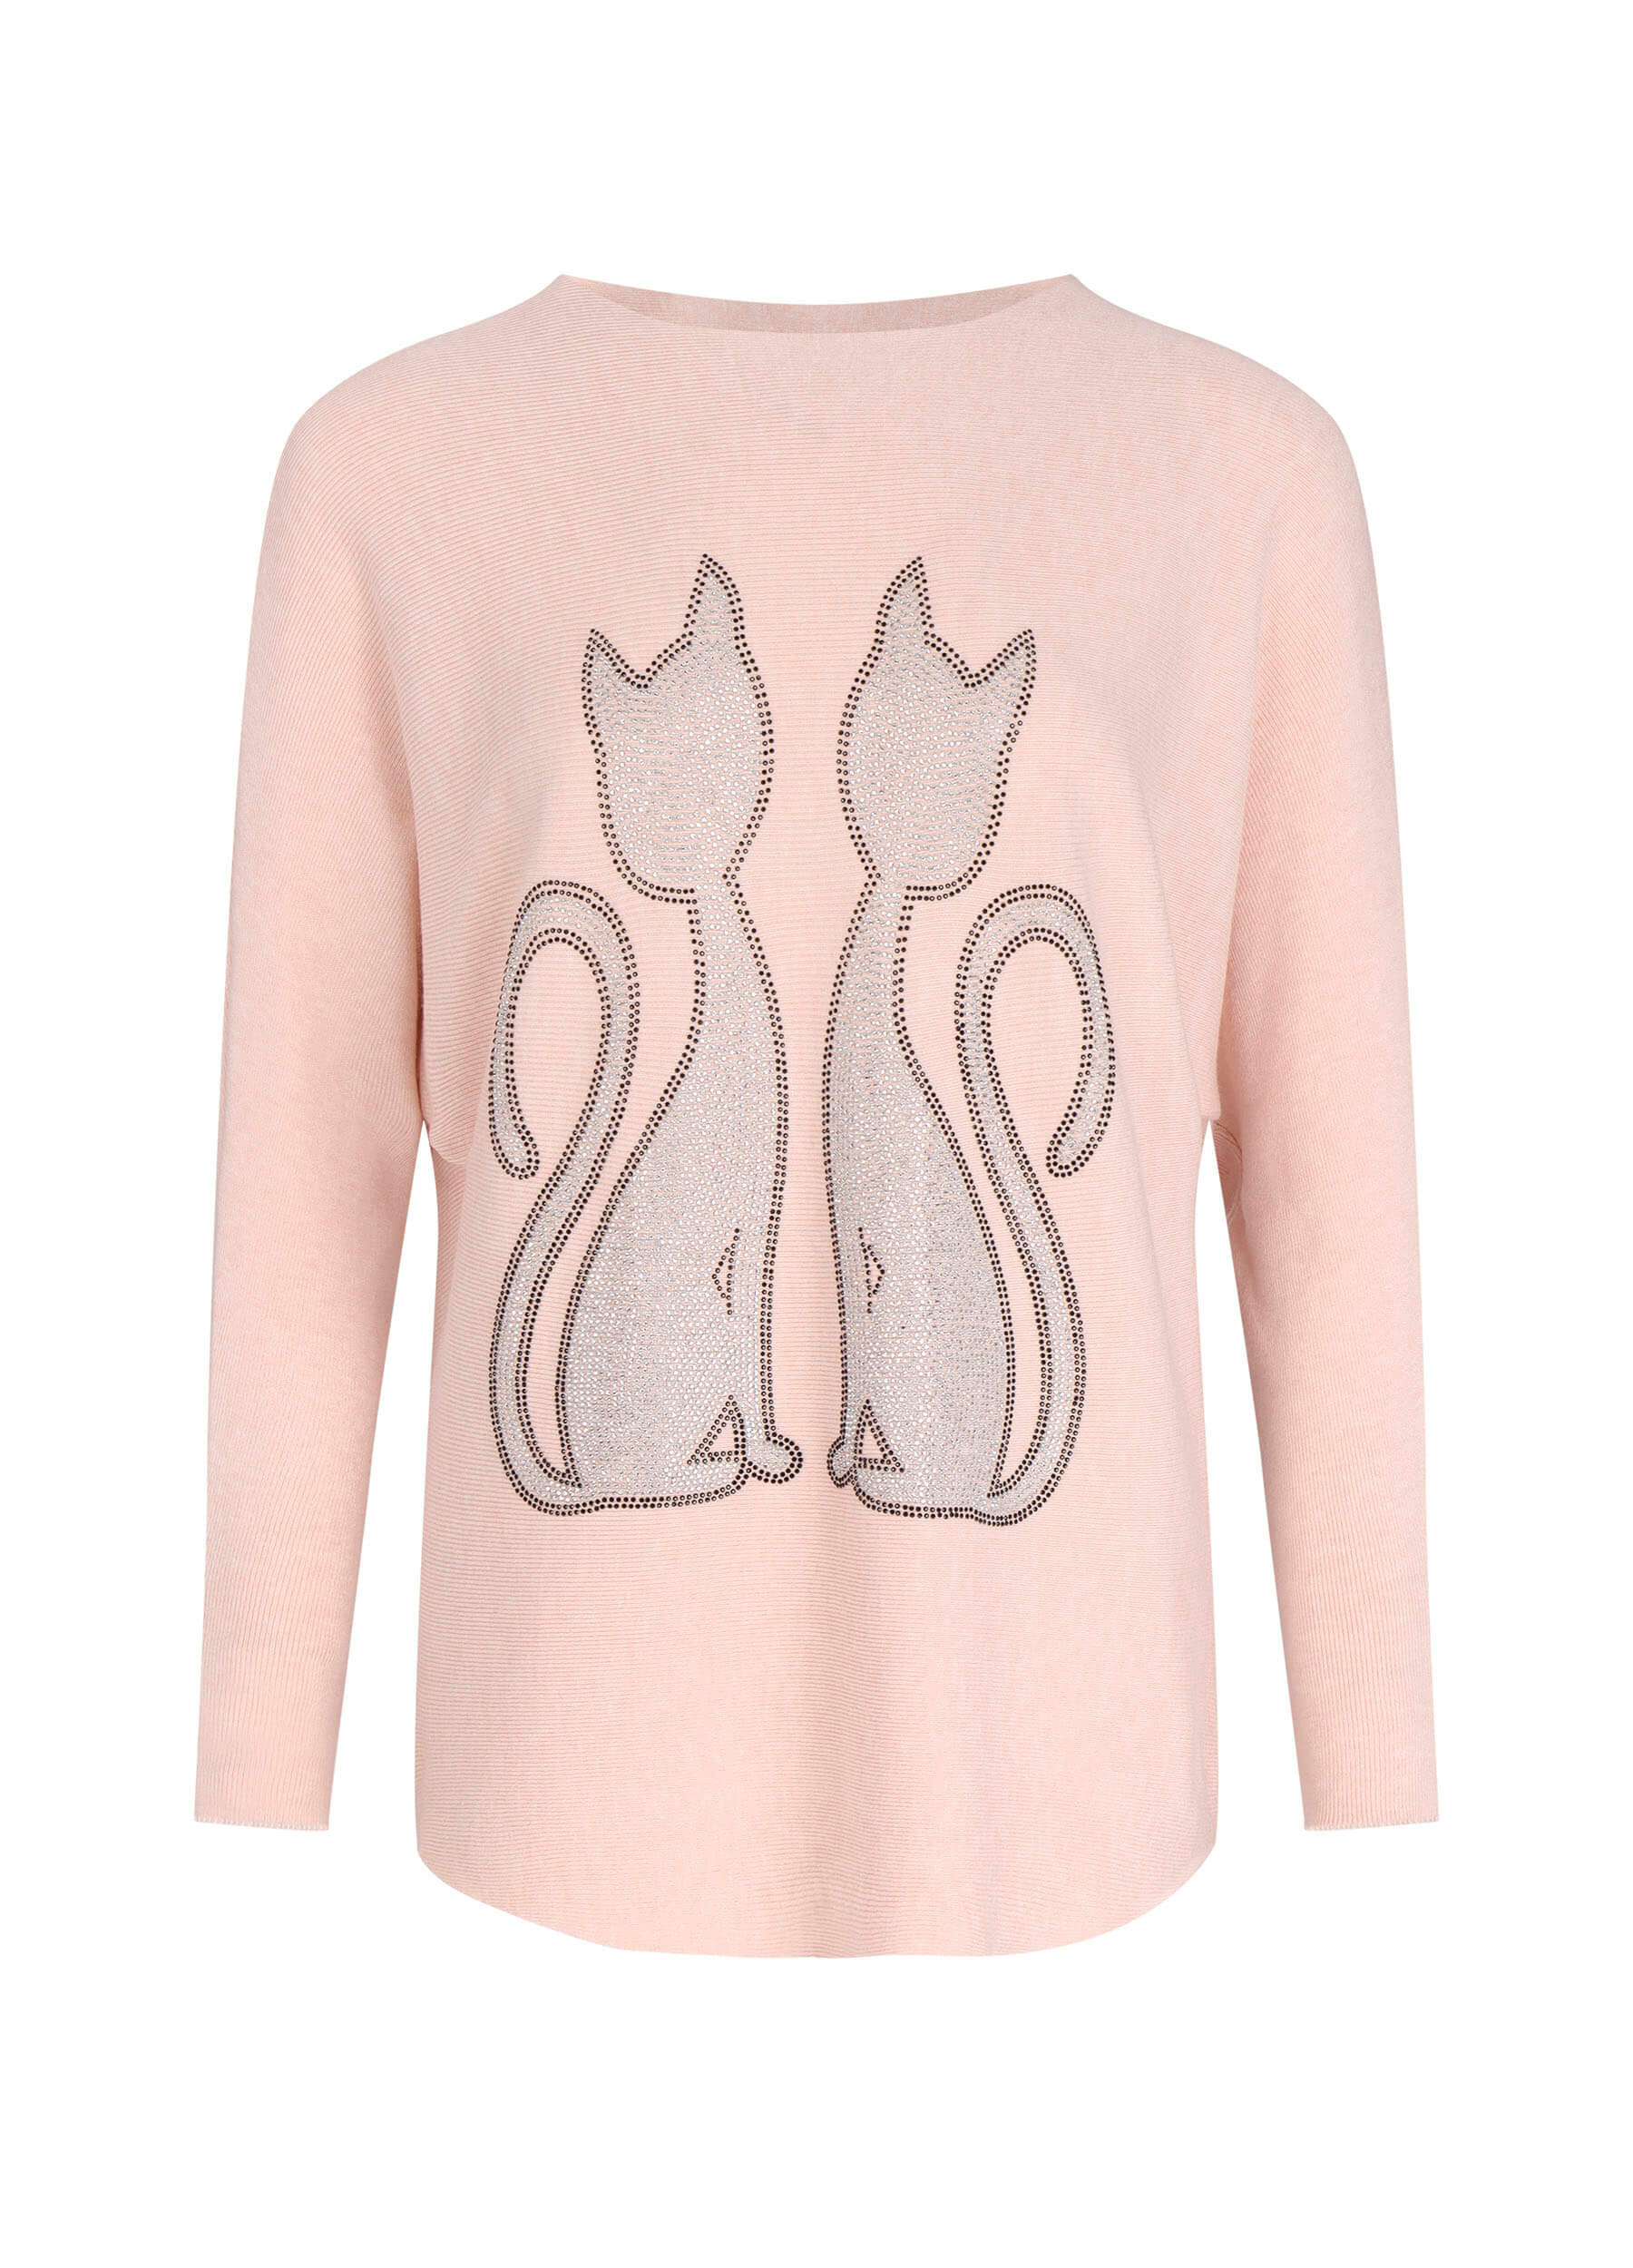 FINEPEEK Women's Spring Round Neck Long Sleeve Cat Graphic Print Sweater-Pink